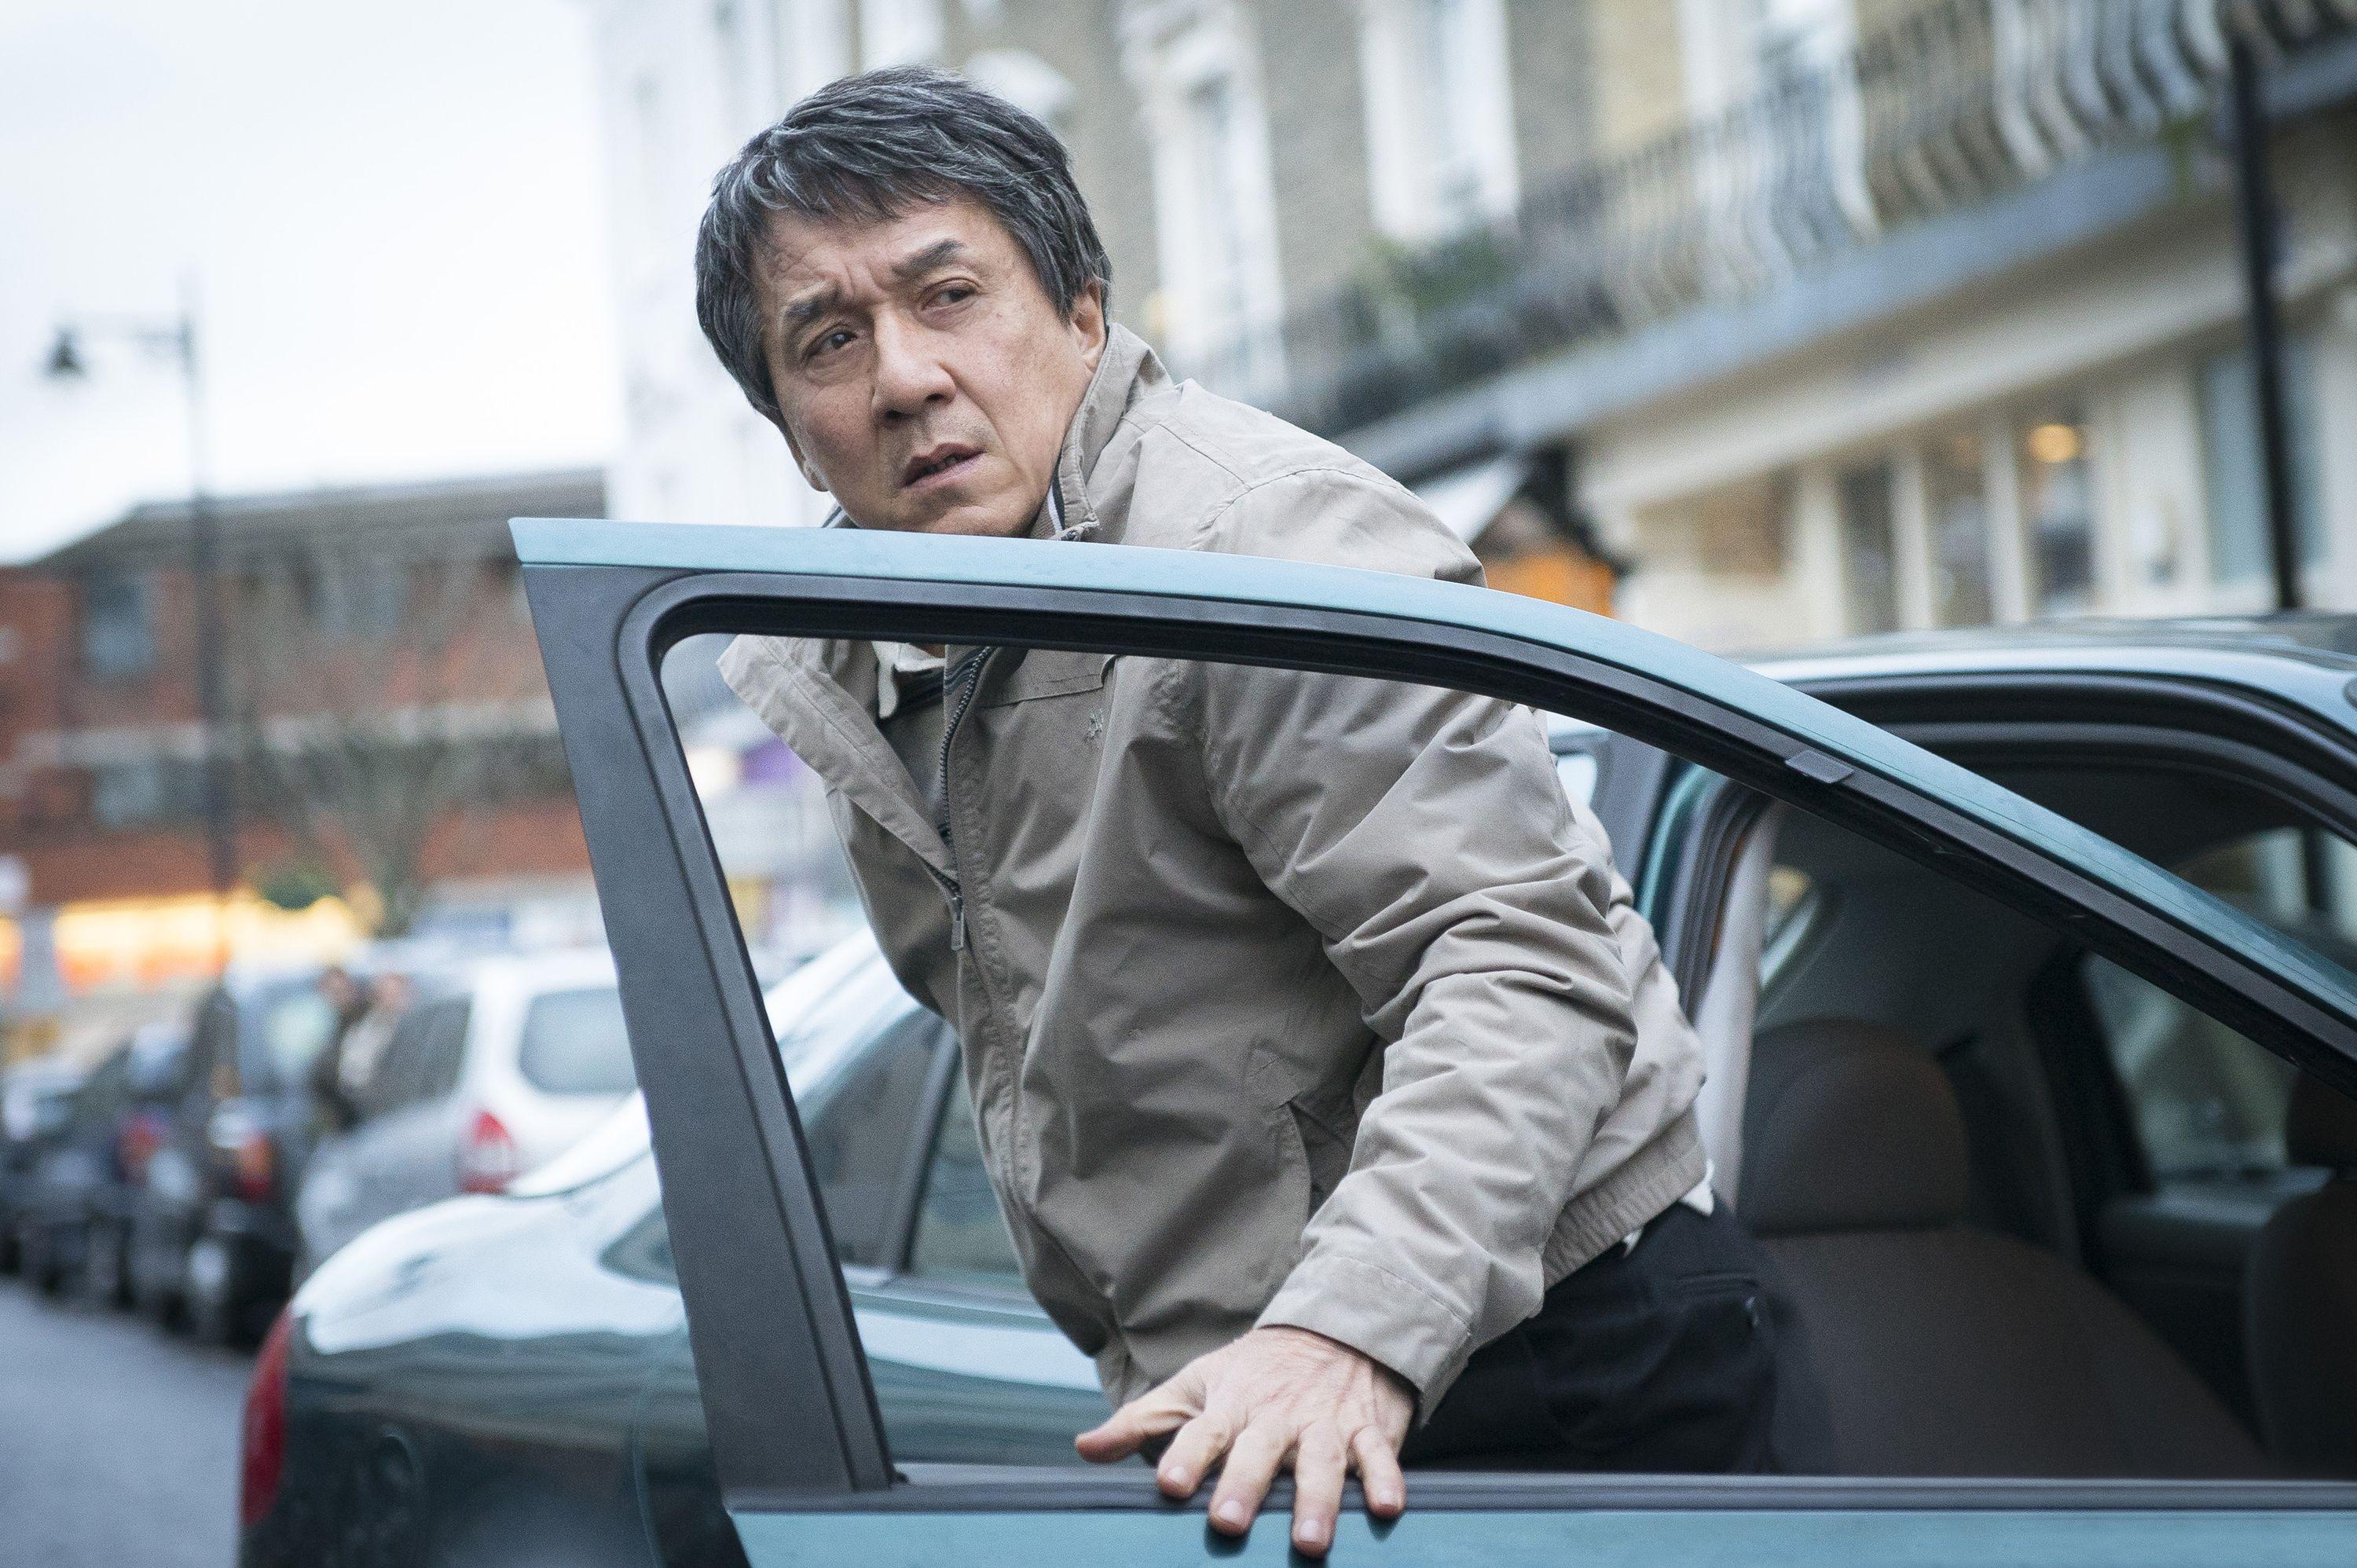 Jackie Chan and Pierce Brosnan square off in first trailer for